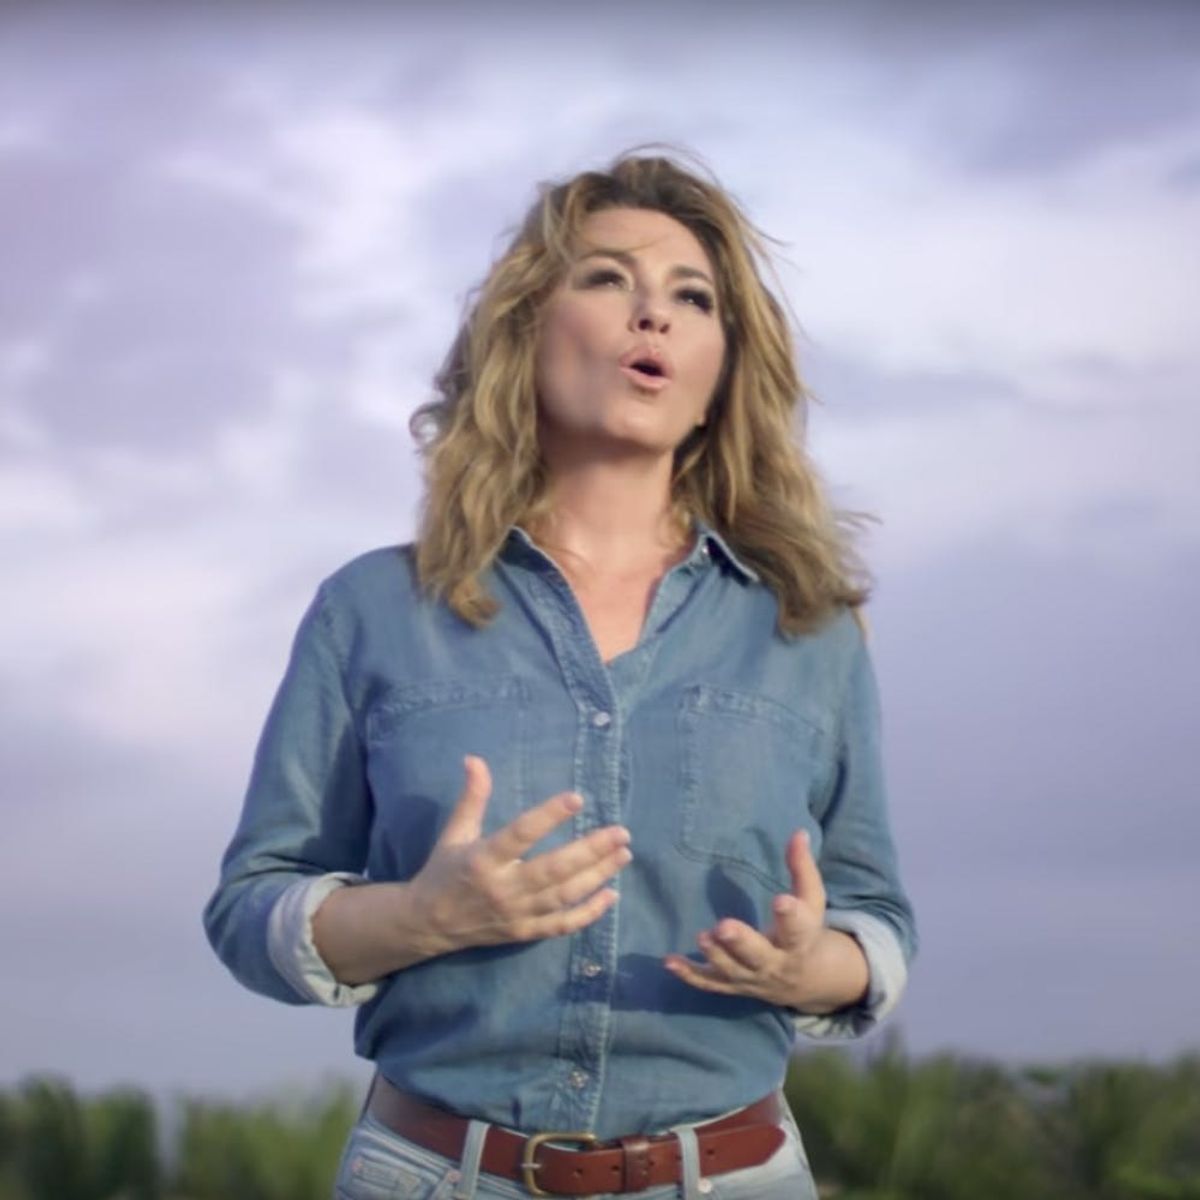 Shania Twain’s “Life’s About to Get Good” Video Will Bring You All Kinds of Joy